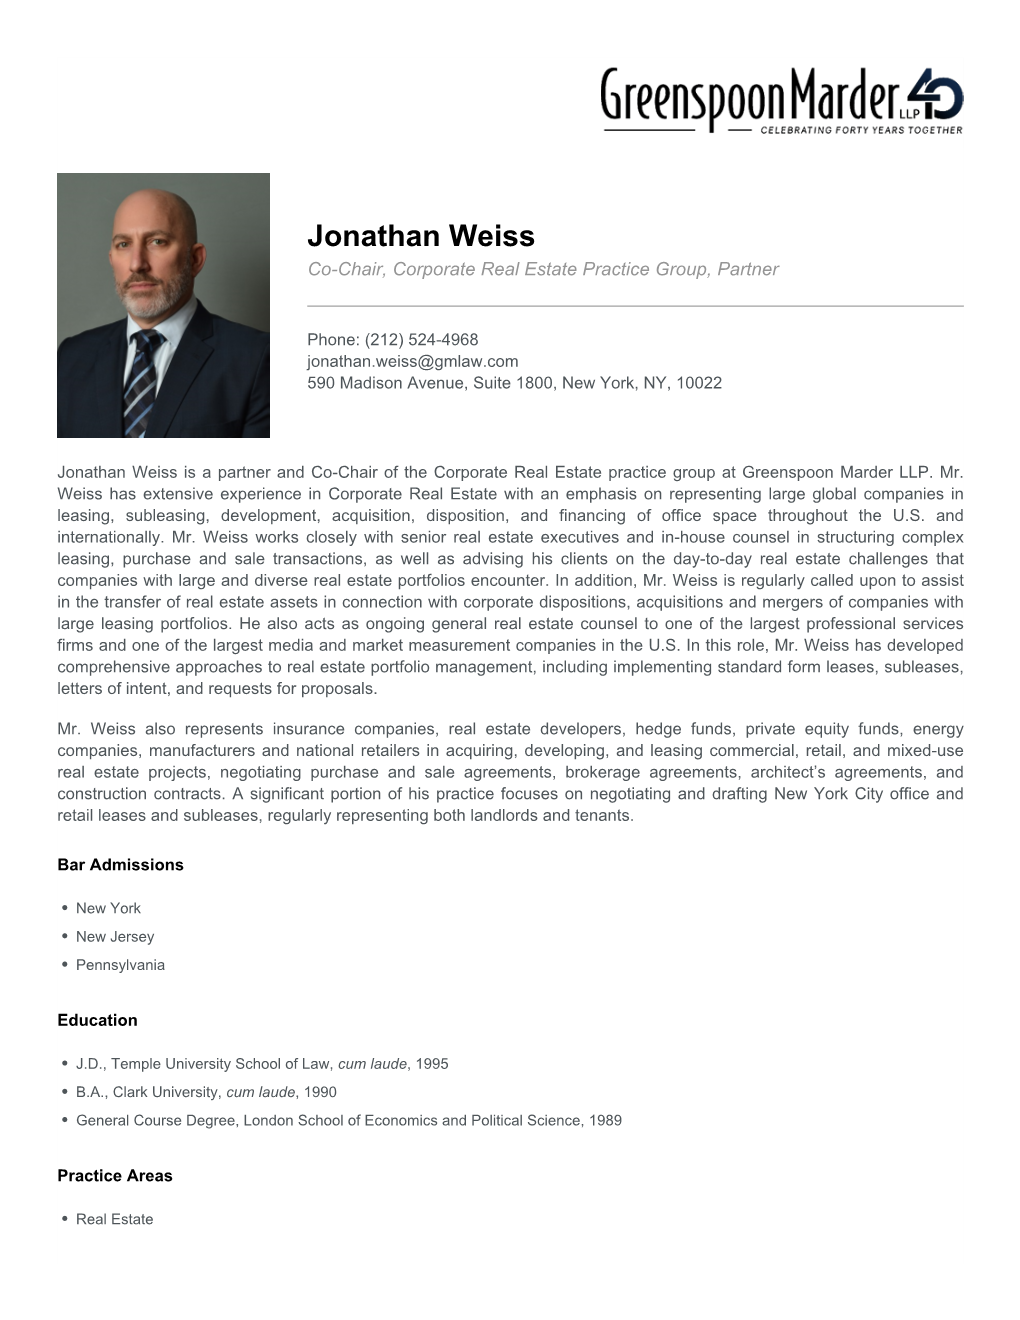 Jonathan Weiss Co-Chair, Corporate Real Estate Practice Group, Partner